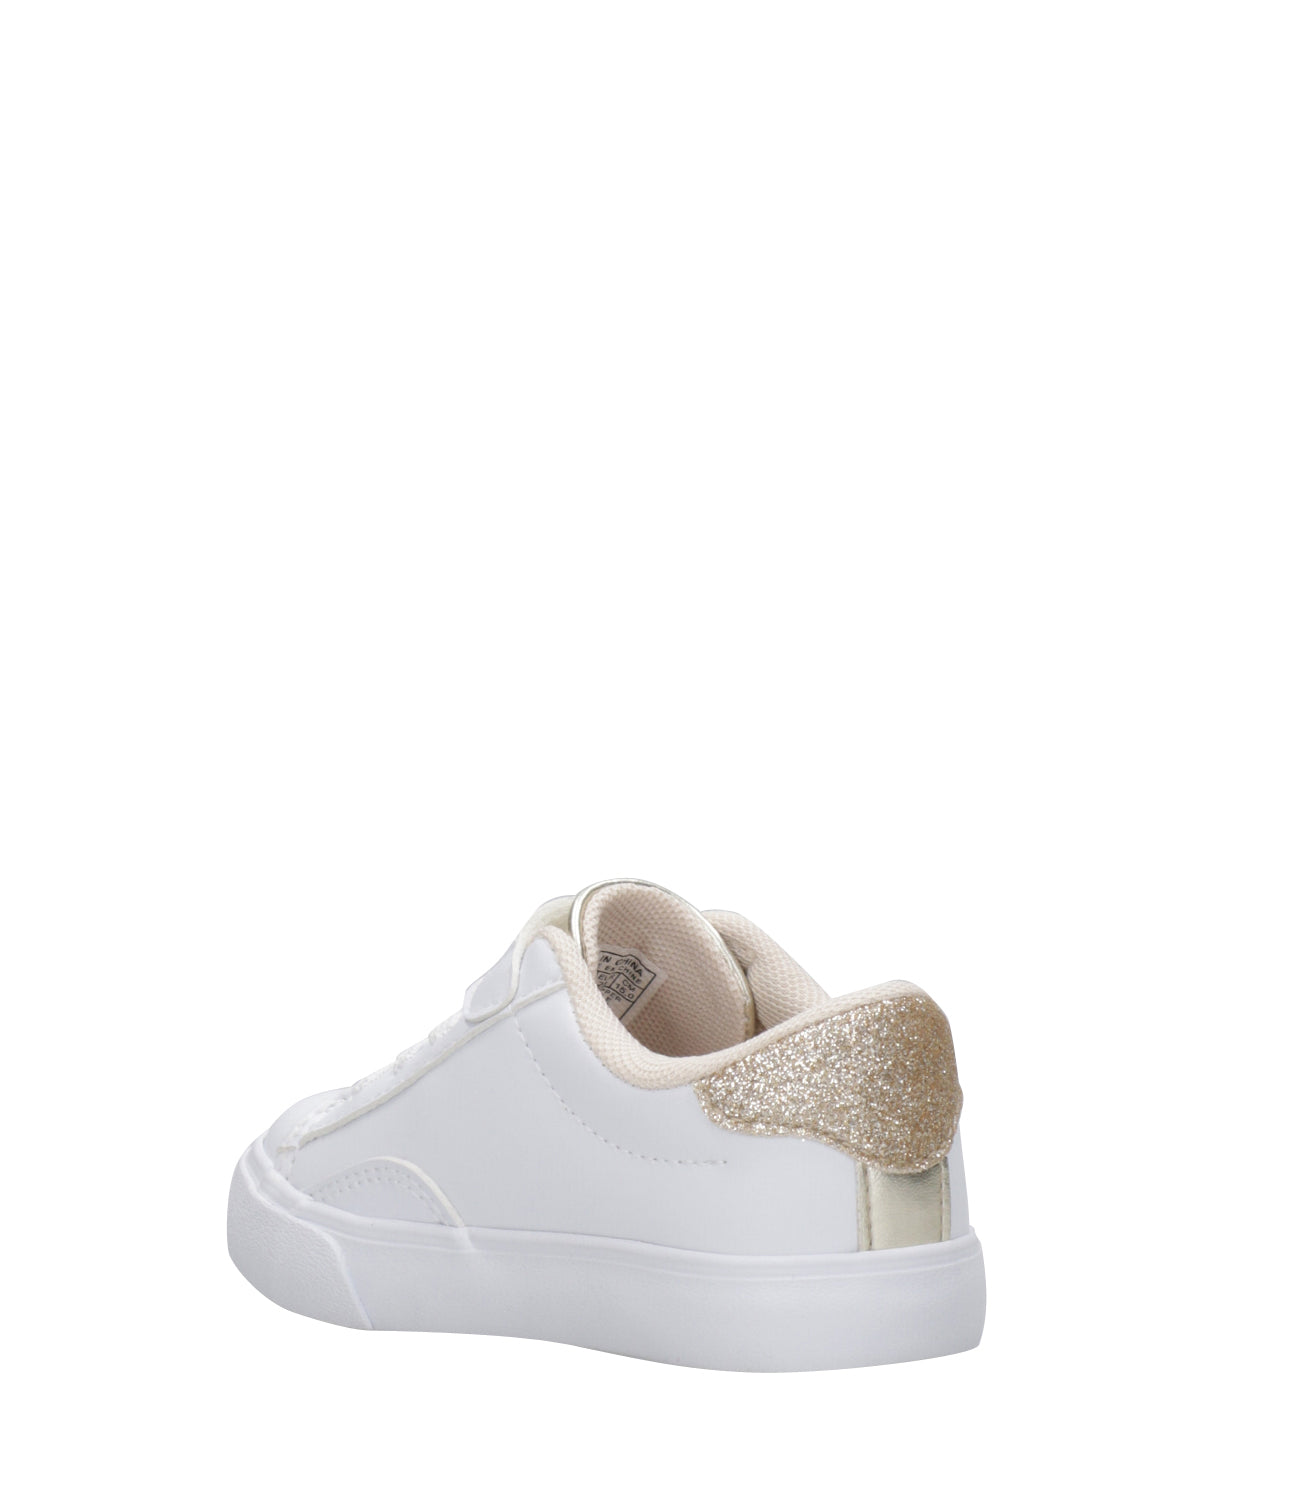 Ralph Lauren Childrenswear | Sneakers Theron V PS White and Gold